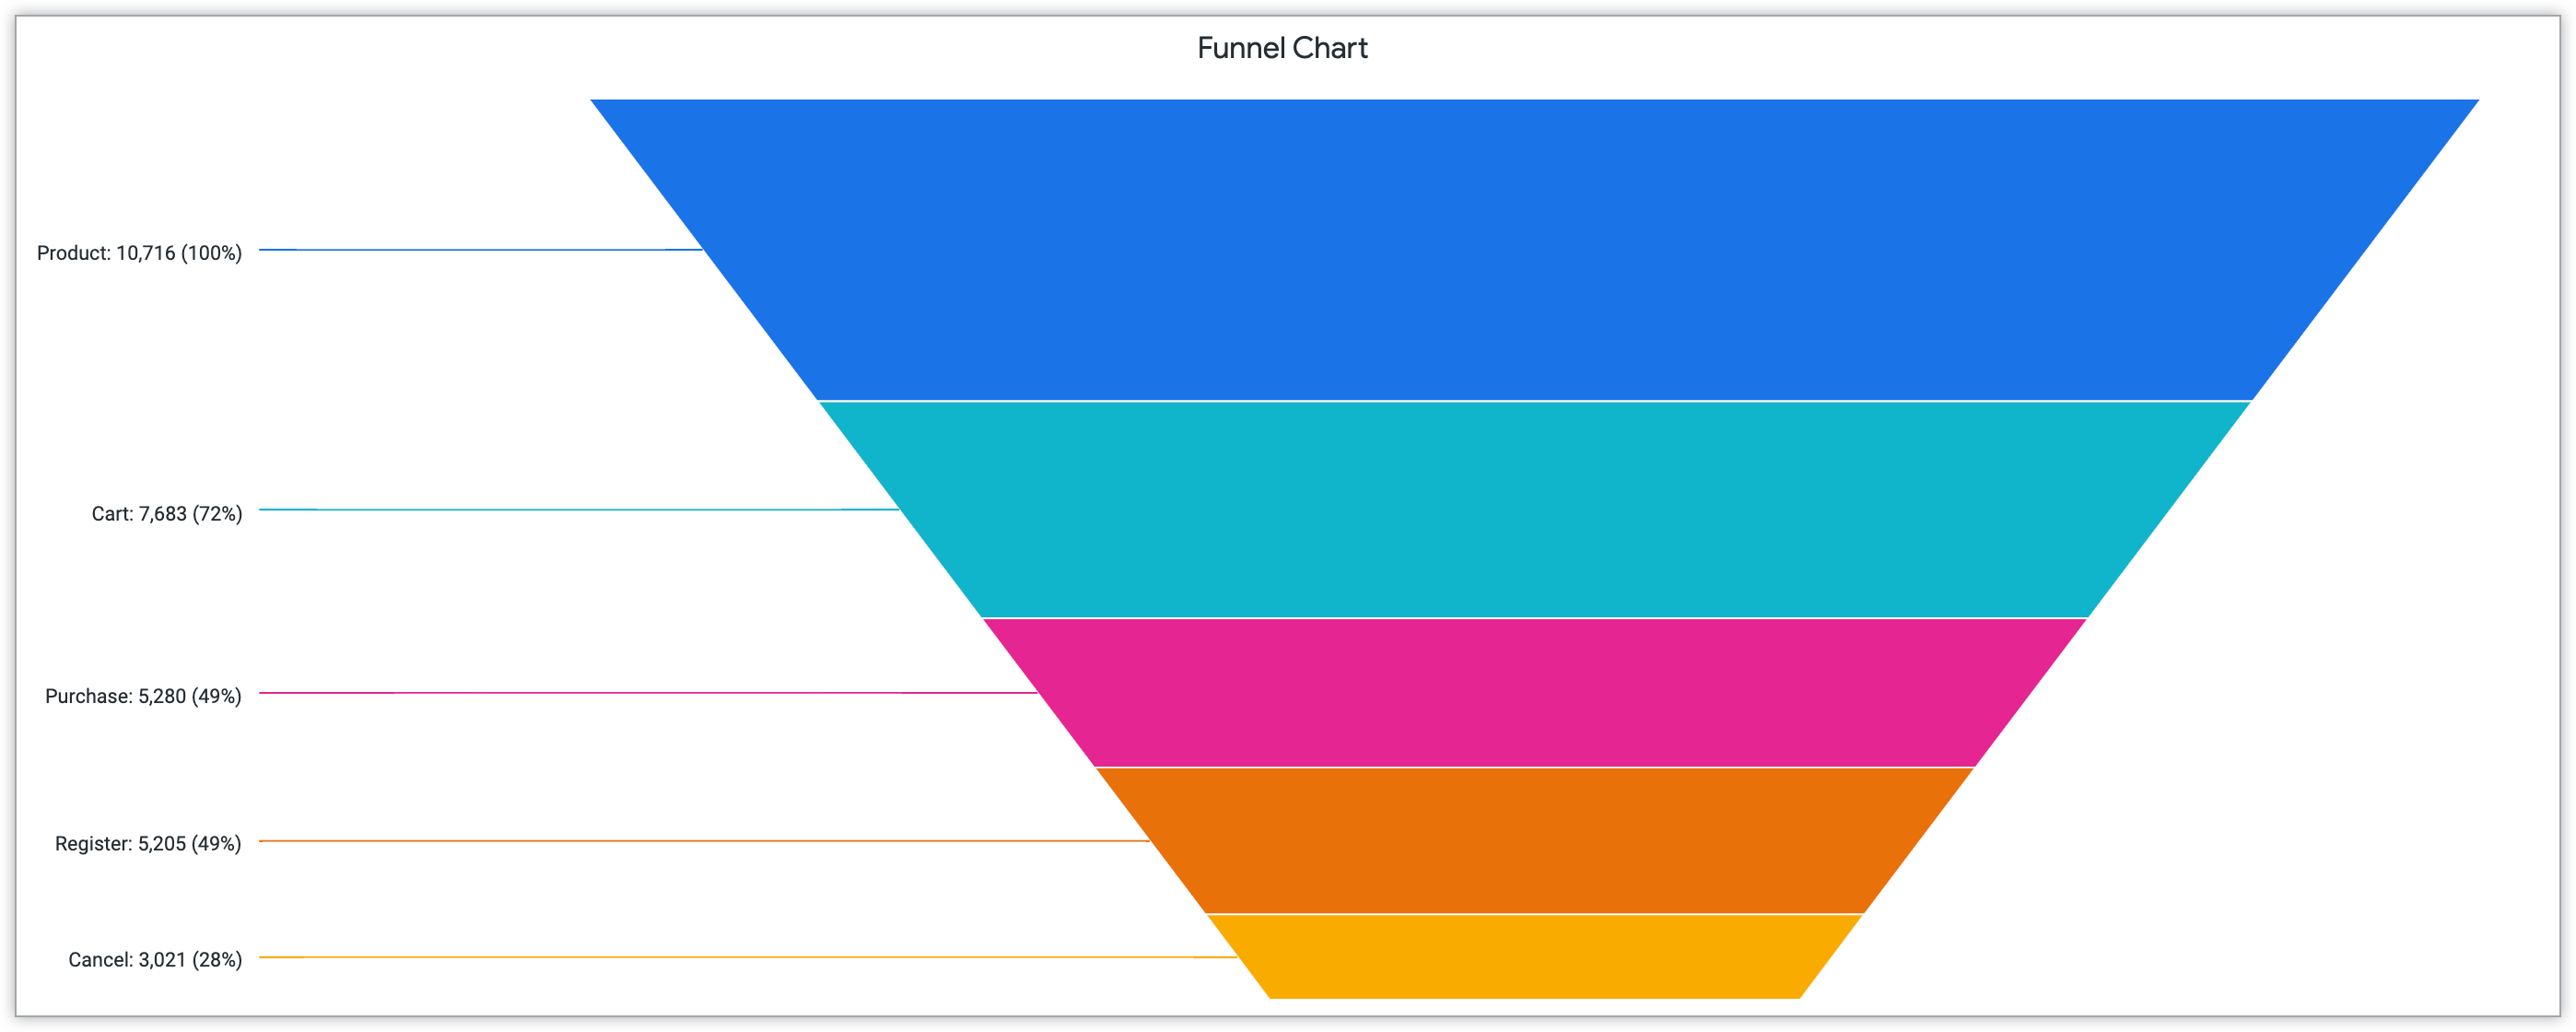 Funnel chart showing the percentage of customer actions at the stages Product, Cart, Purchase, Register, and Cancel.